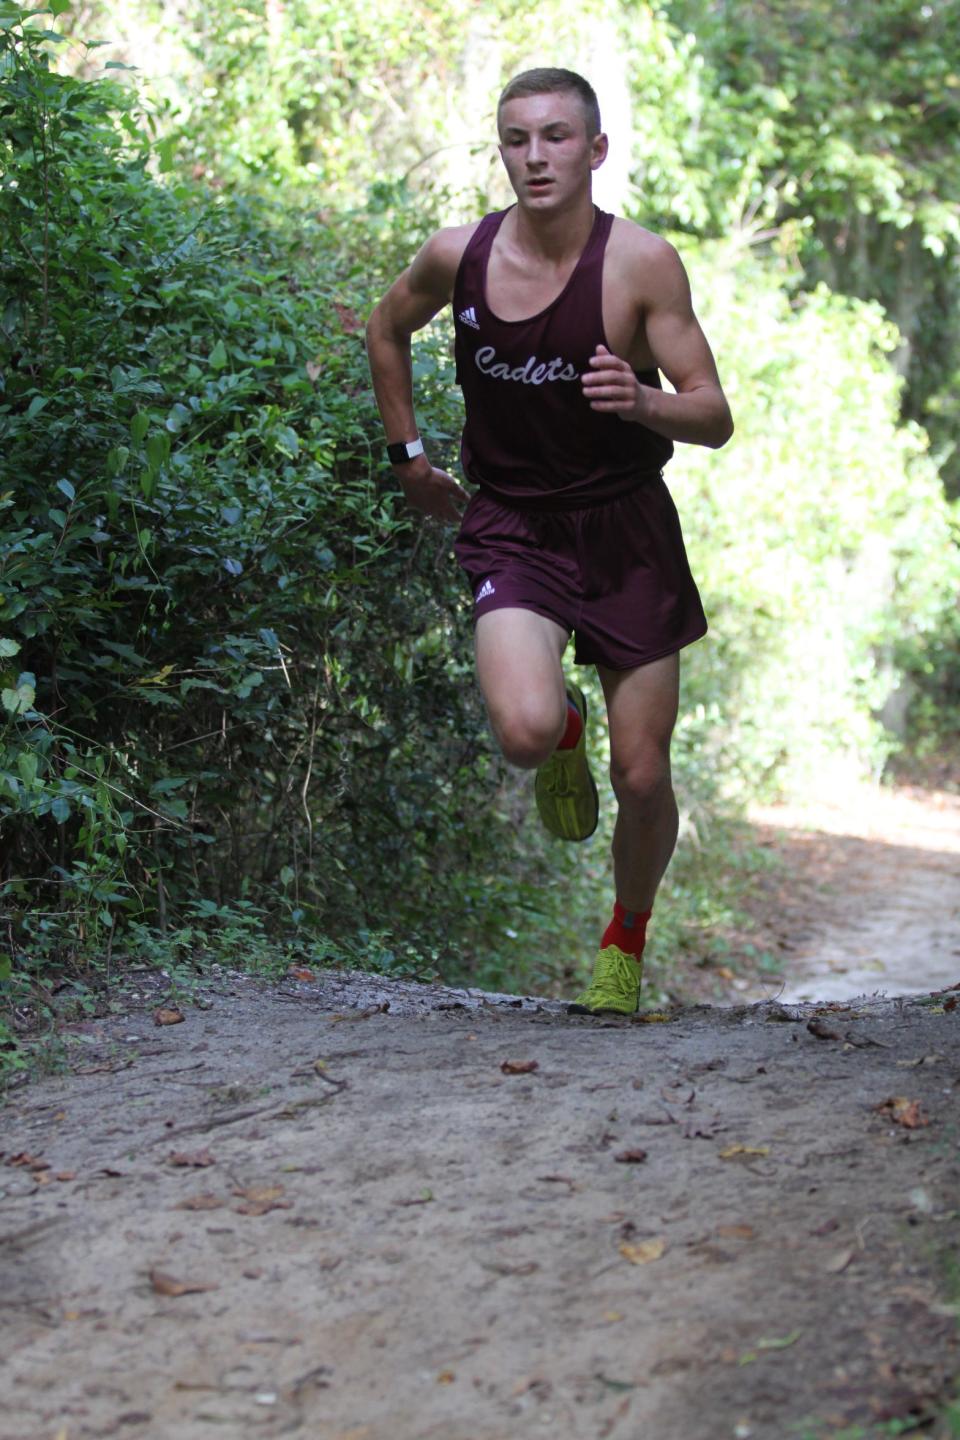 Benedictine's John Dodson, then a freshman, runs up a hill during the Class 3-4A region meet in 2021. Now a sophomore, Dodson is one of the top returning runners in the Greater Savannah area.